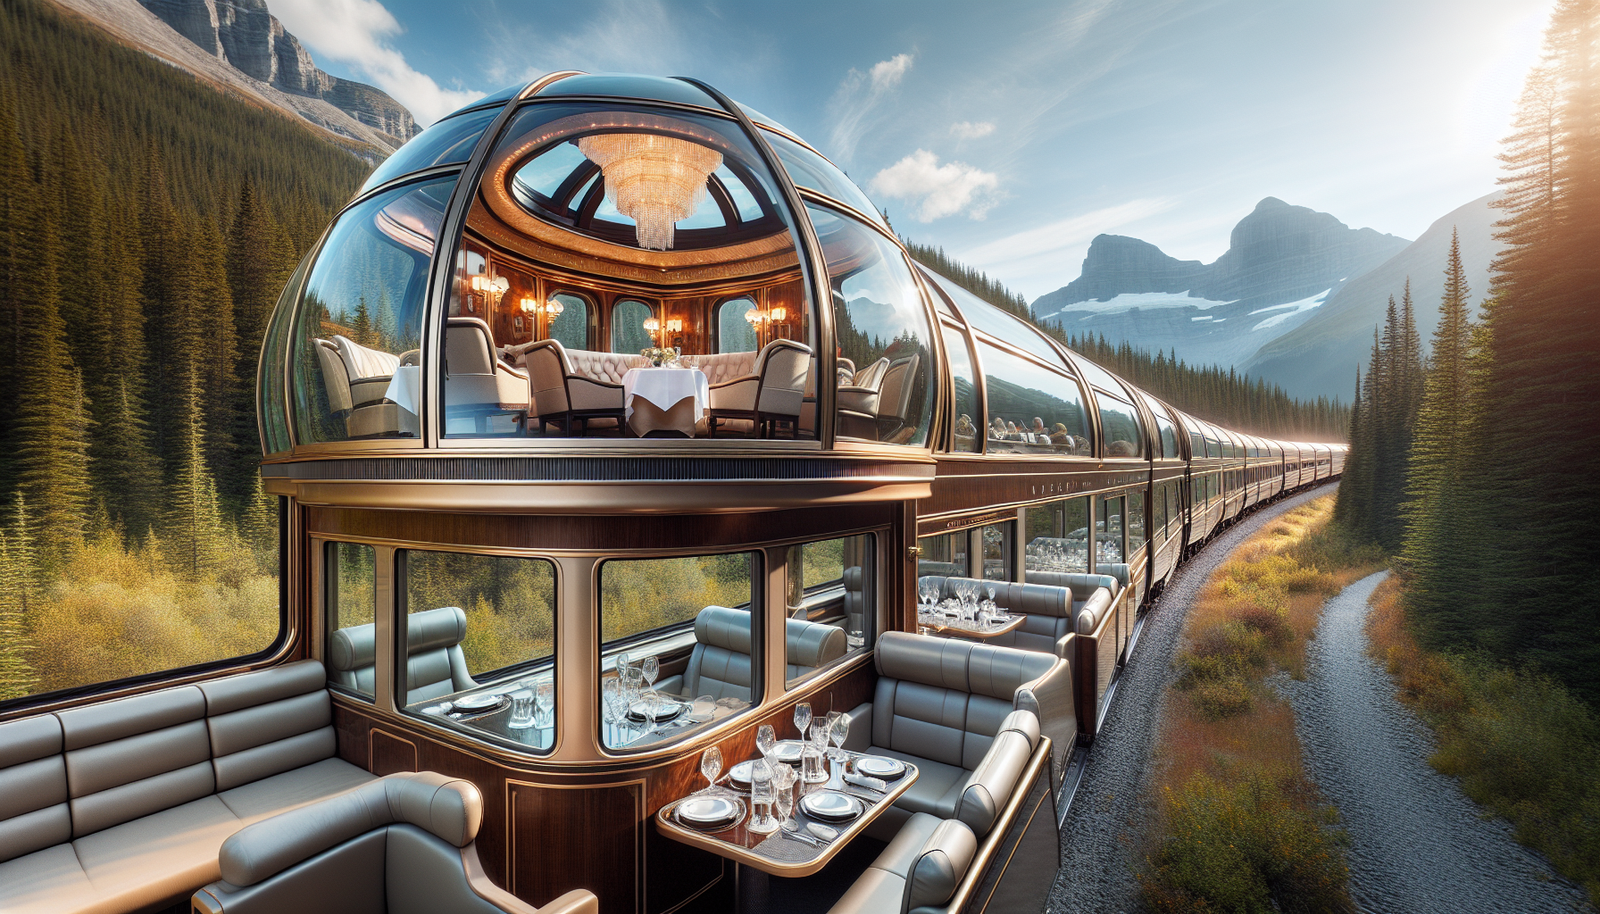 Luxurious GoldLeaf Service on the Rocky Mountaineer train